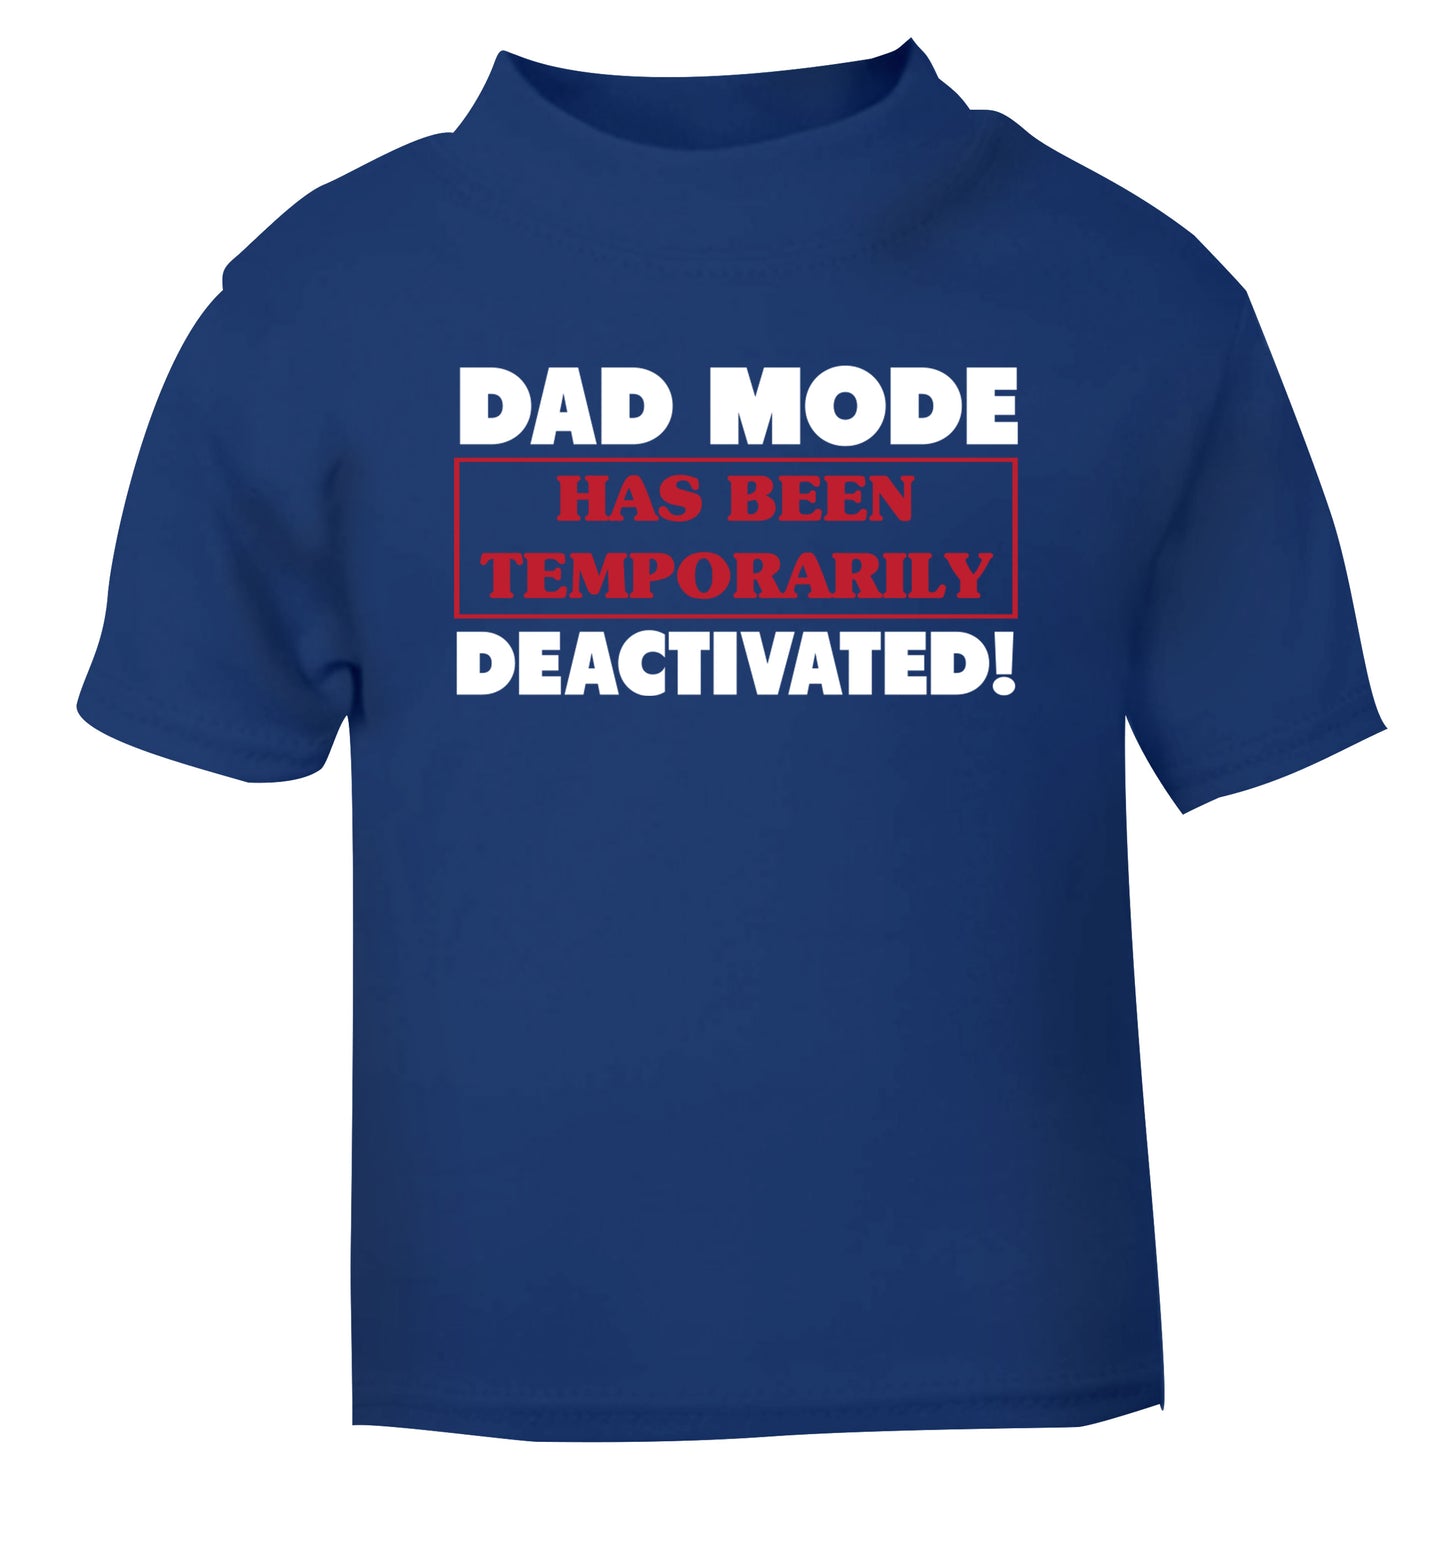 Dad mode has been temporarily deactivated! blue Baby Toddler Tshirt 2 Years